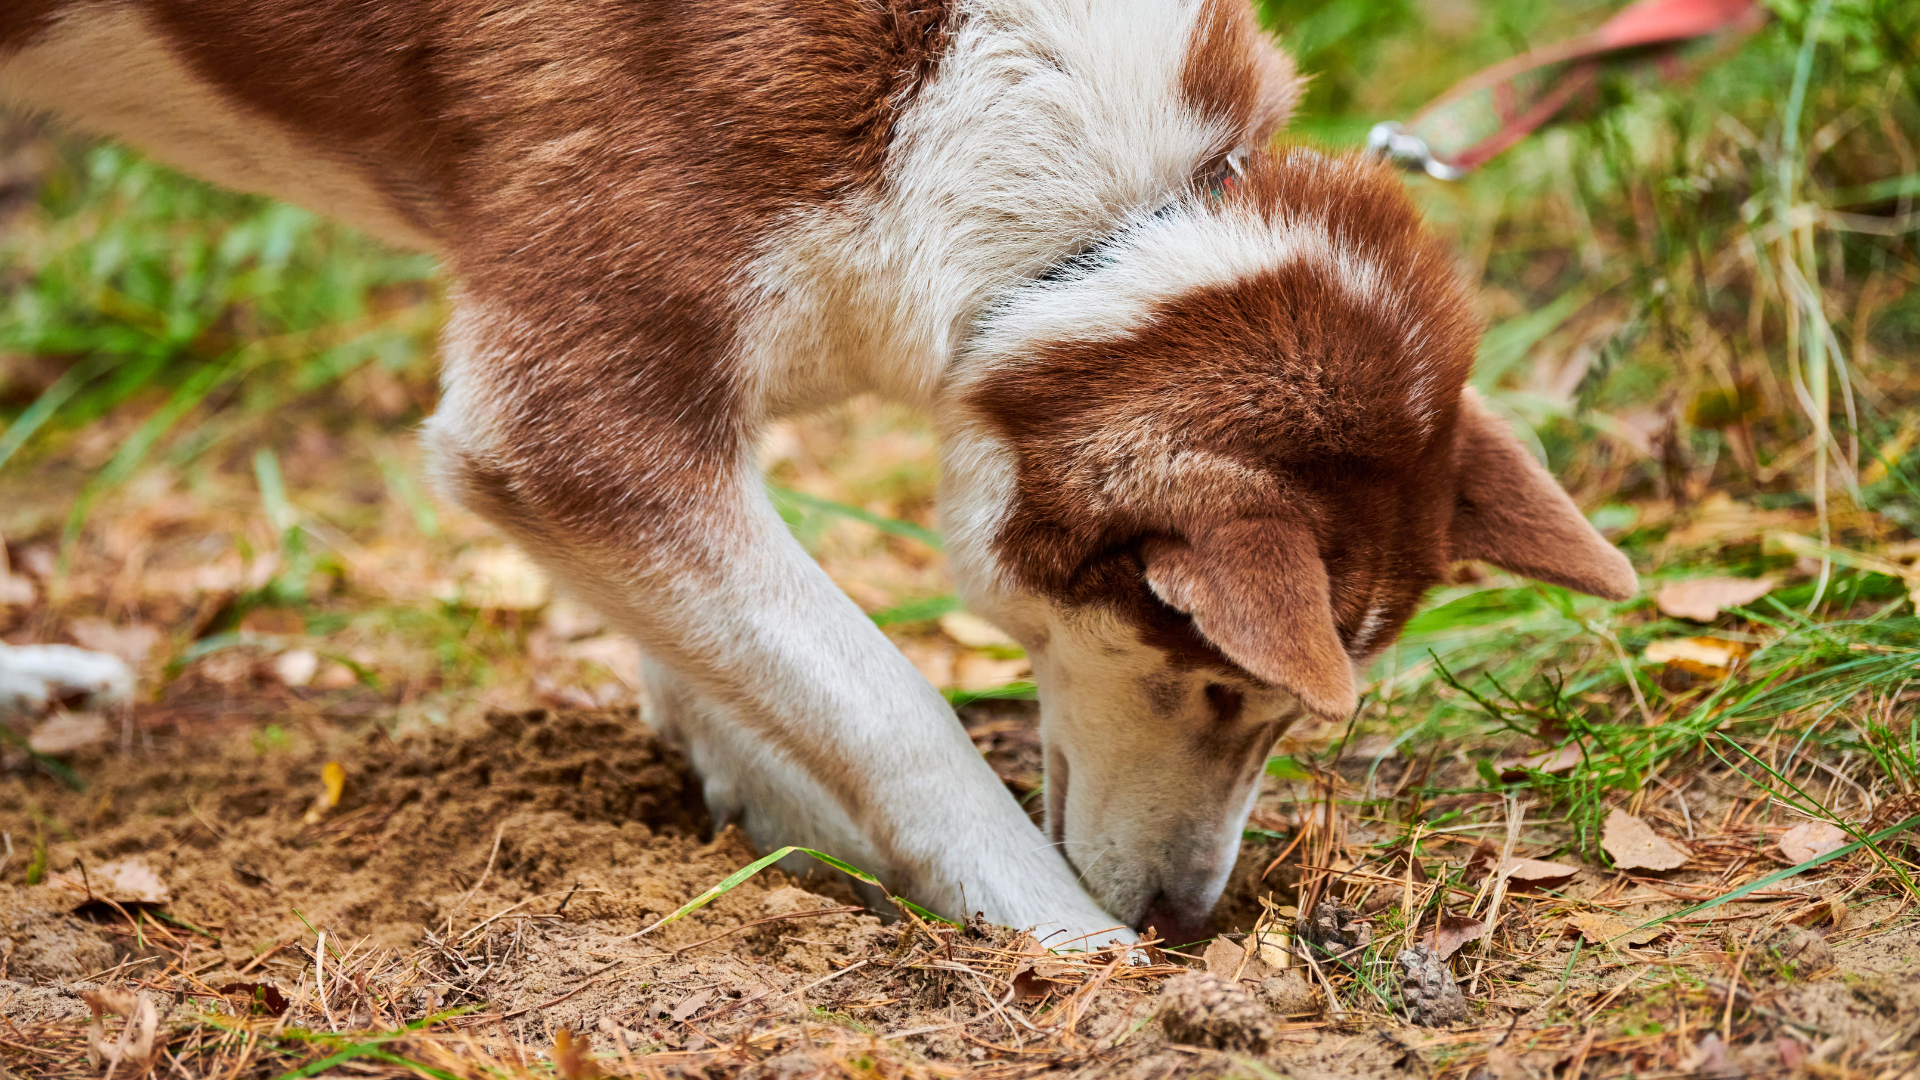 Does Sniffing Make Dogs Tired?